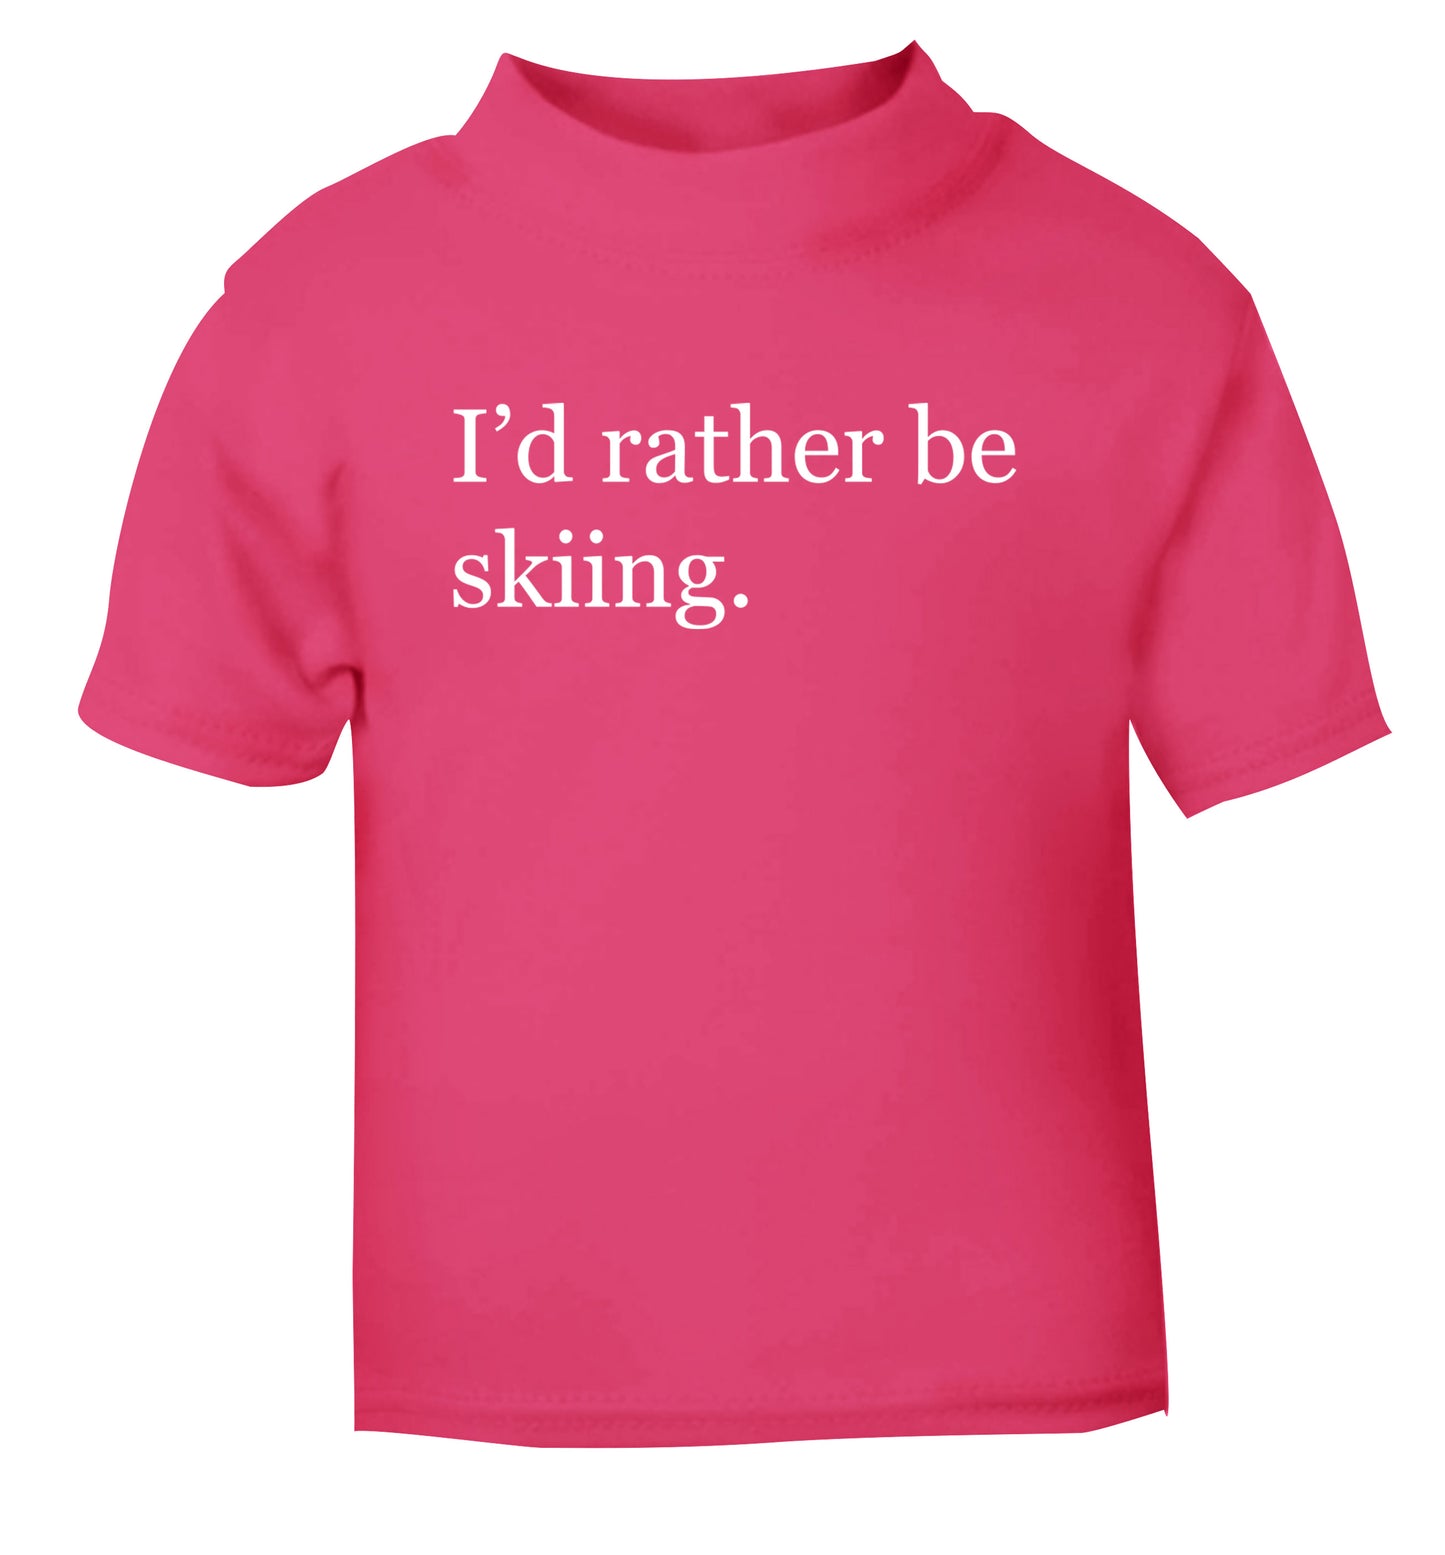 I'd rather be skiing pink Baby Toddler Tshirt 2 Years